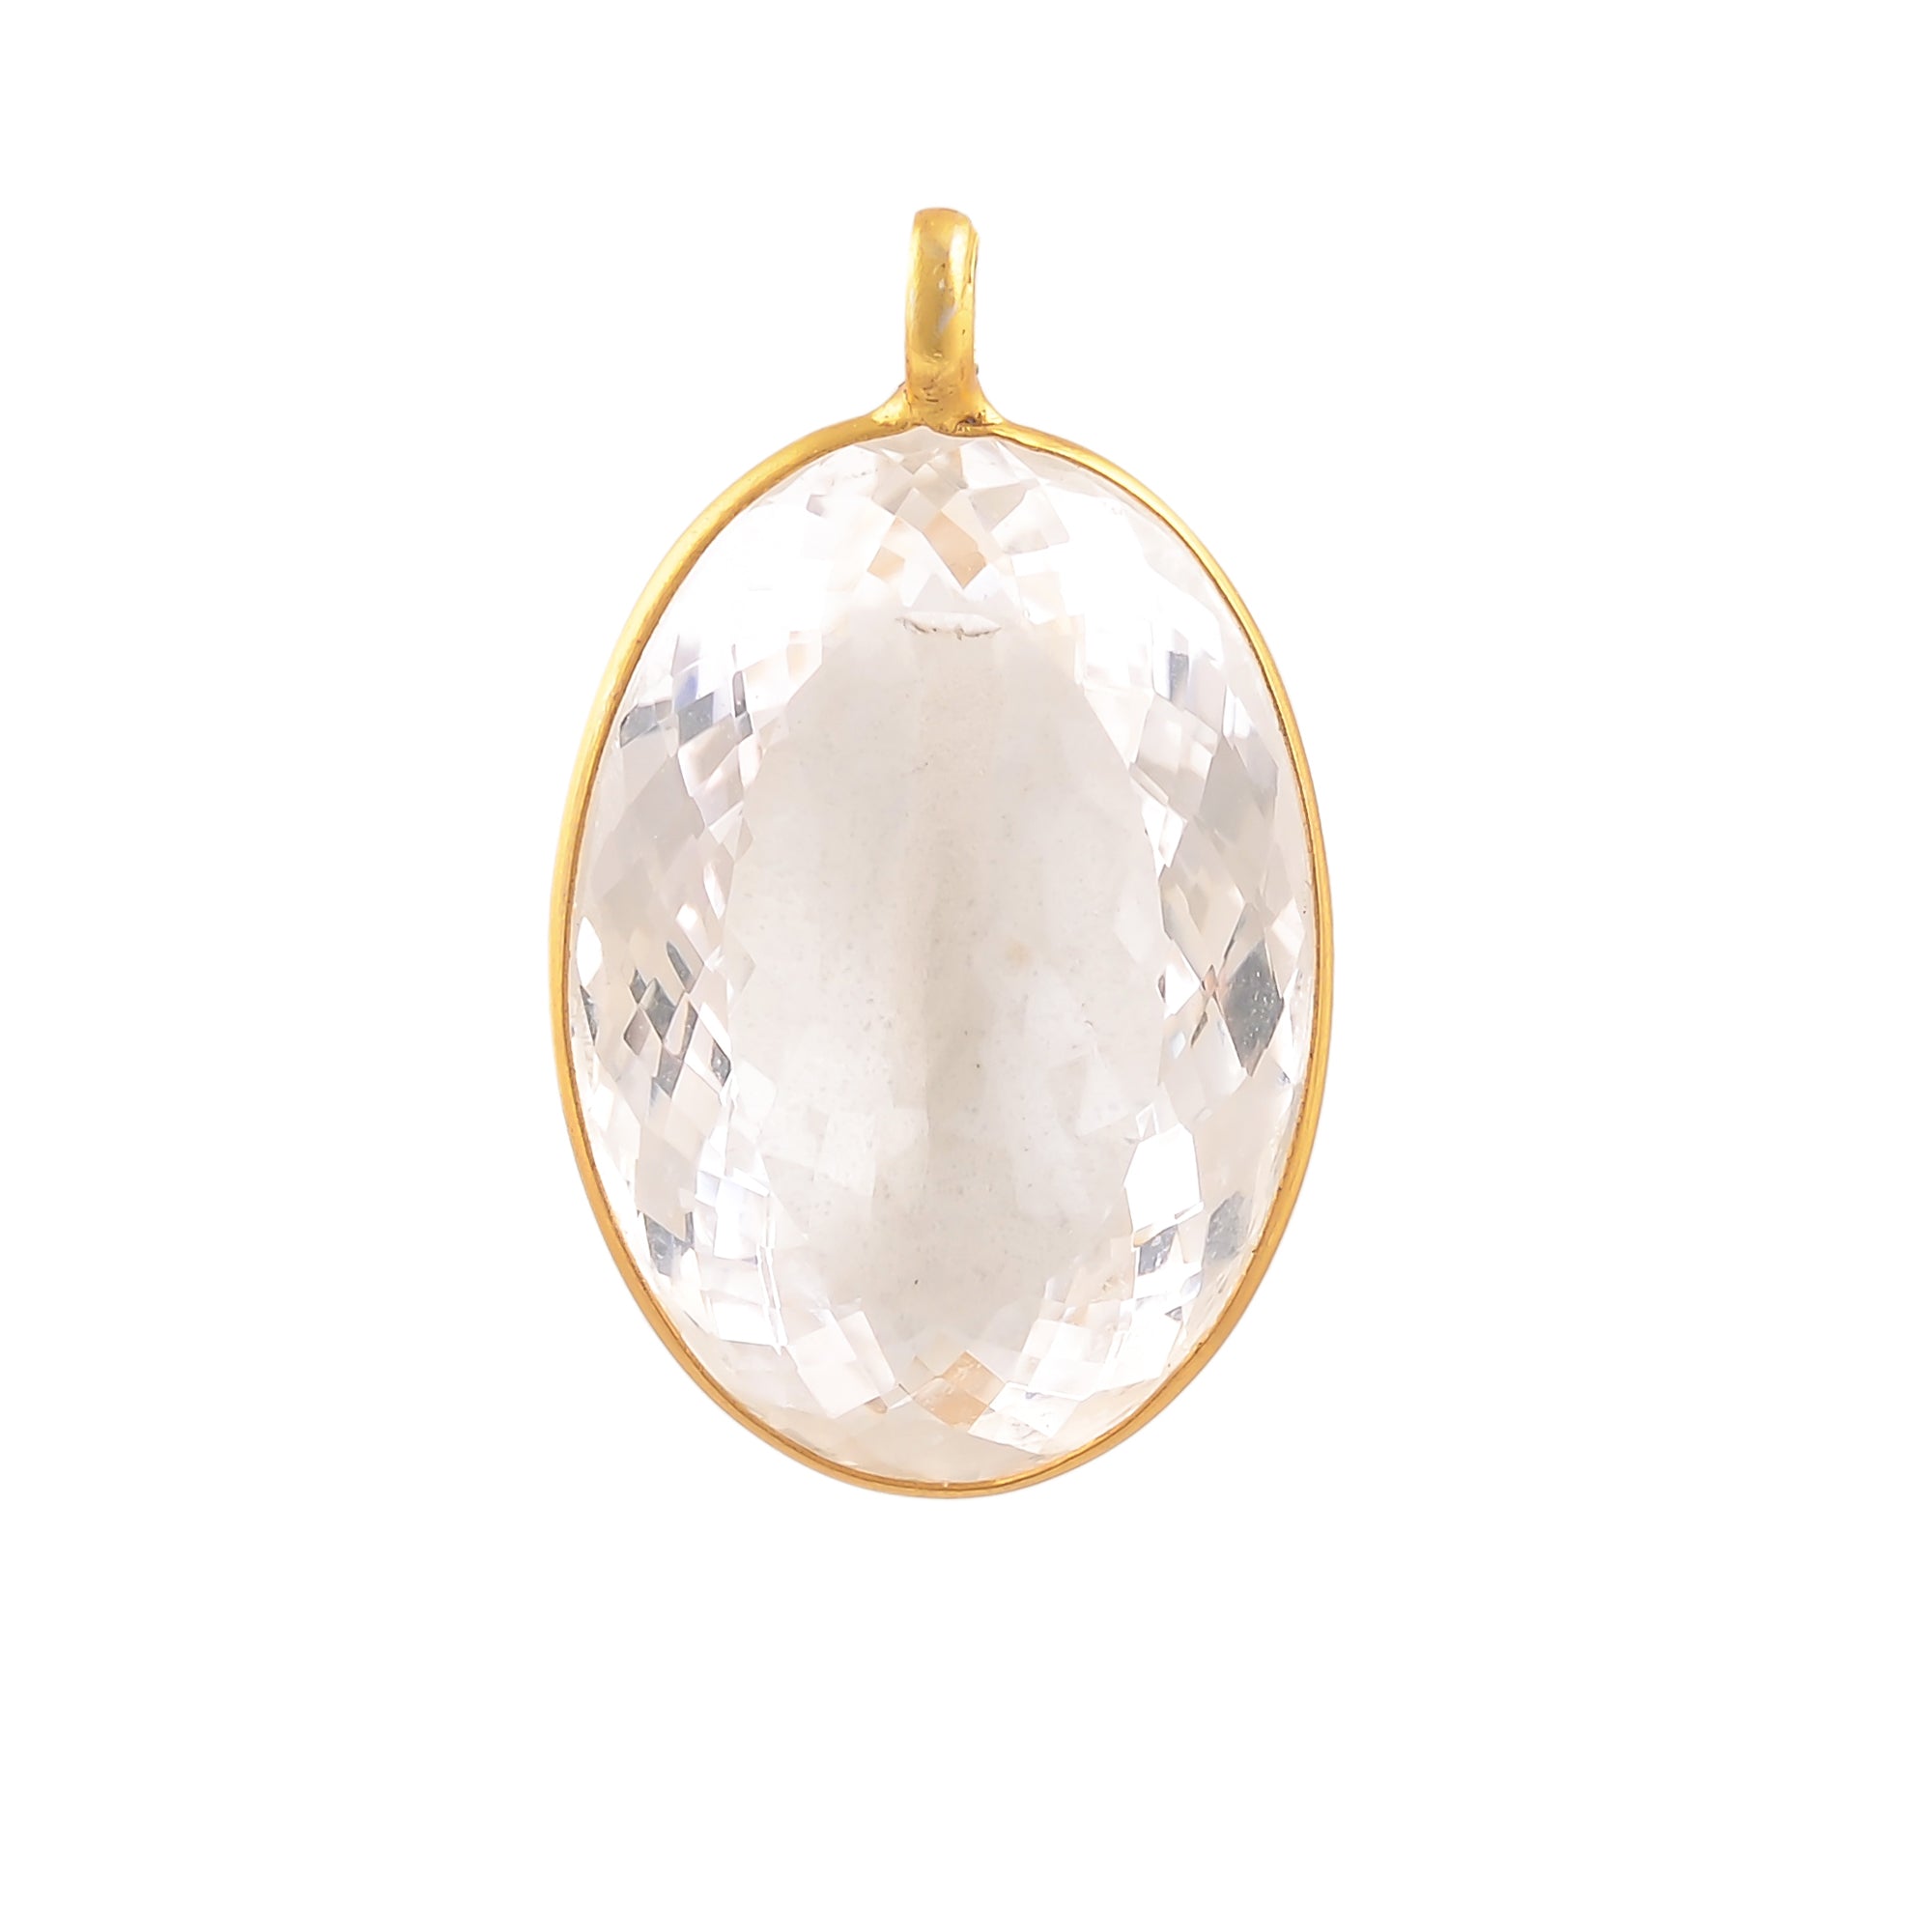 Buy Handmade Silver Gold Plated Crystal Pendant